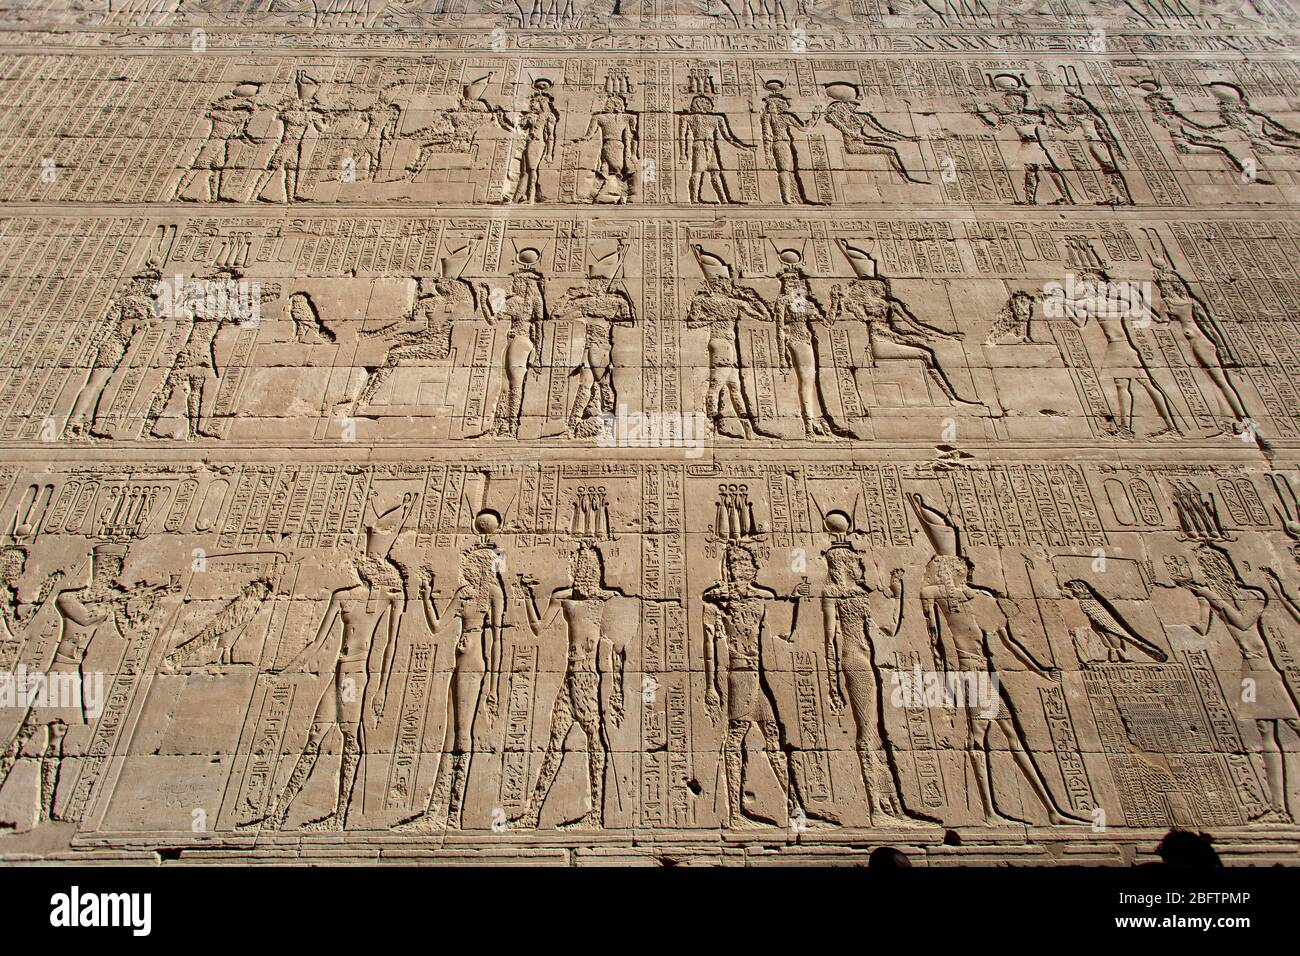 Hieroglyphics Reliefs on a wall at the Temple of Horus, at Edfu, Egypt. Stock Photo